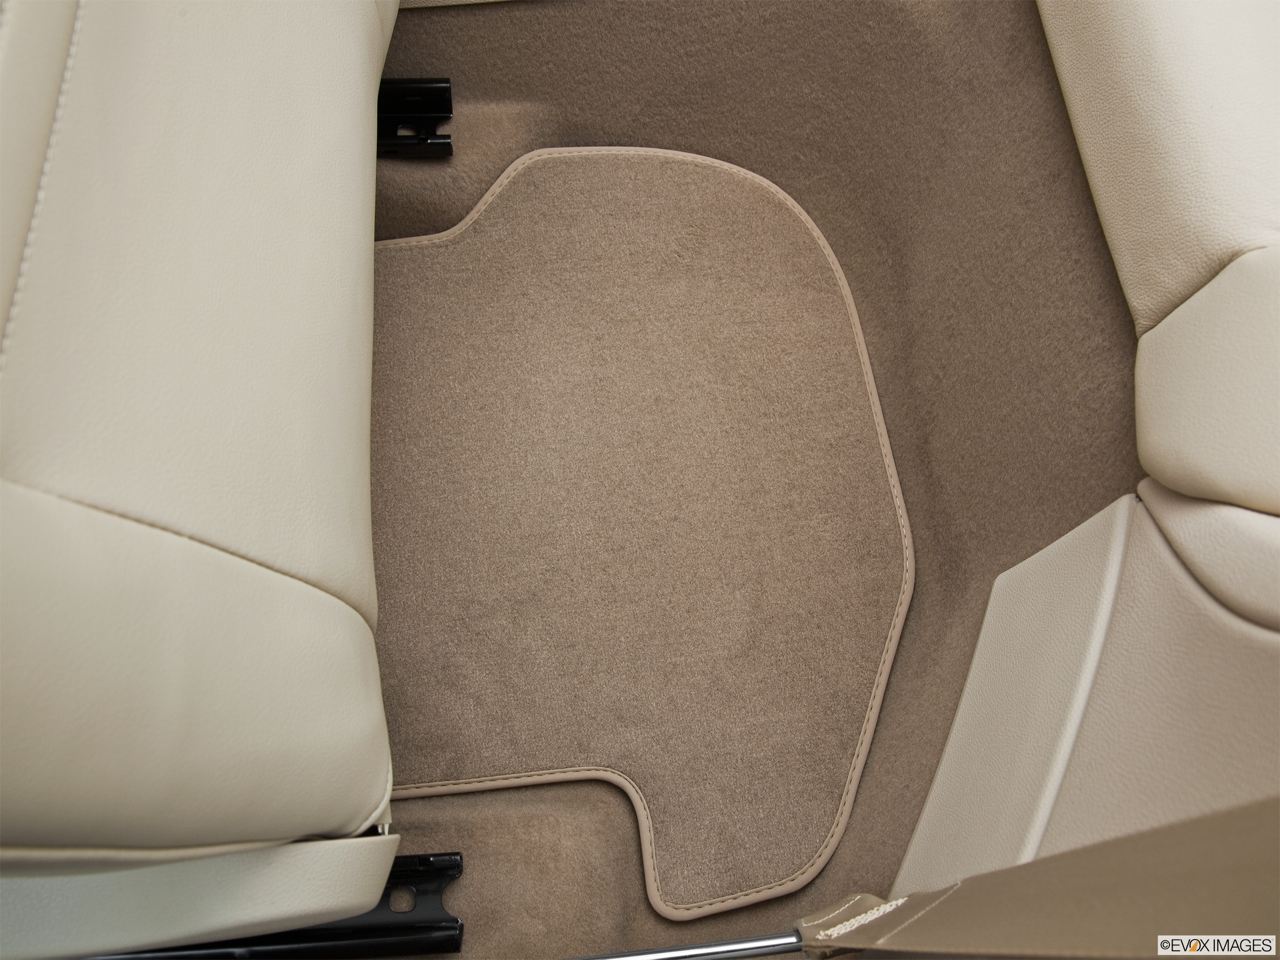 2011 Volkswagen Eos Lux Rear driver's side floor mat. Mid-seat level from outside looking in. 